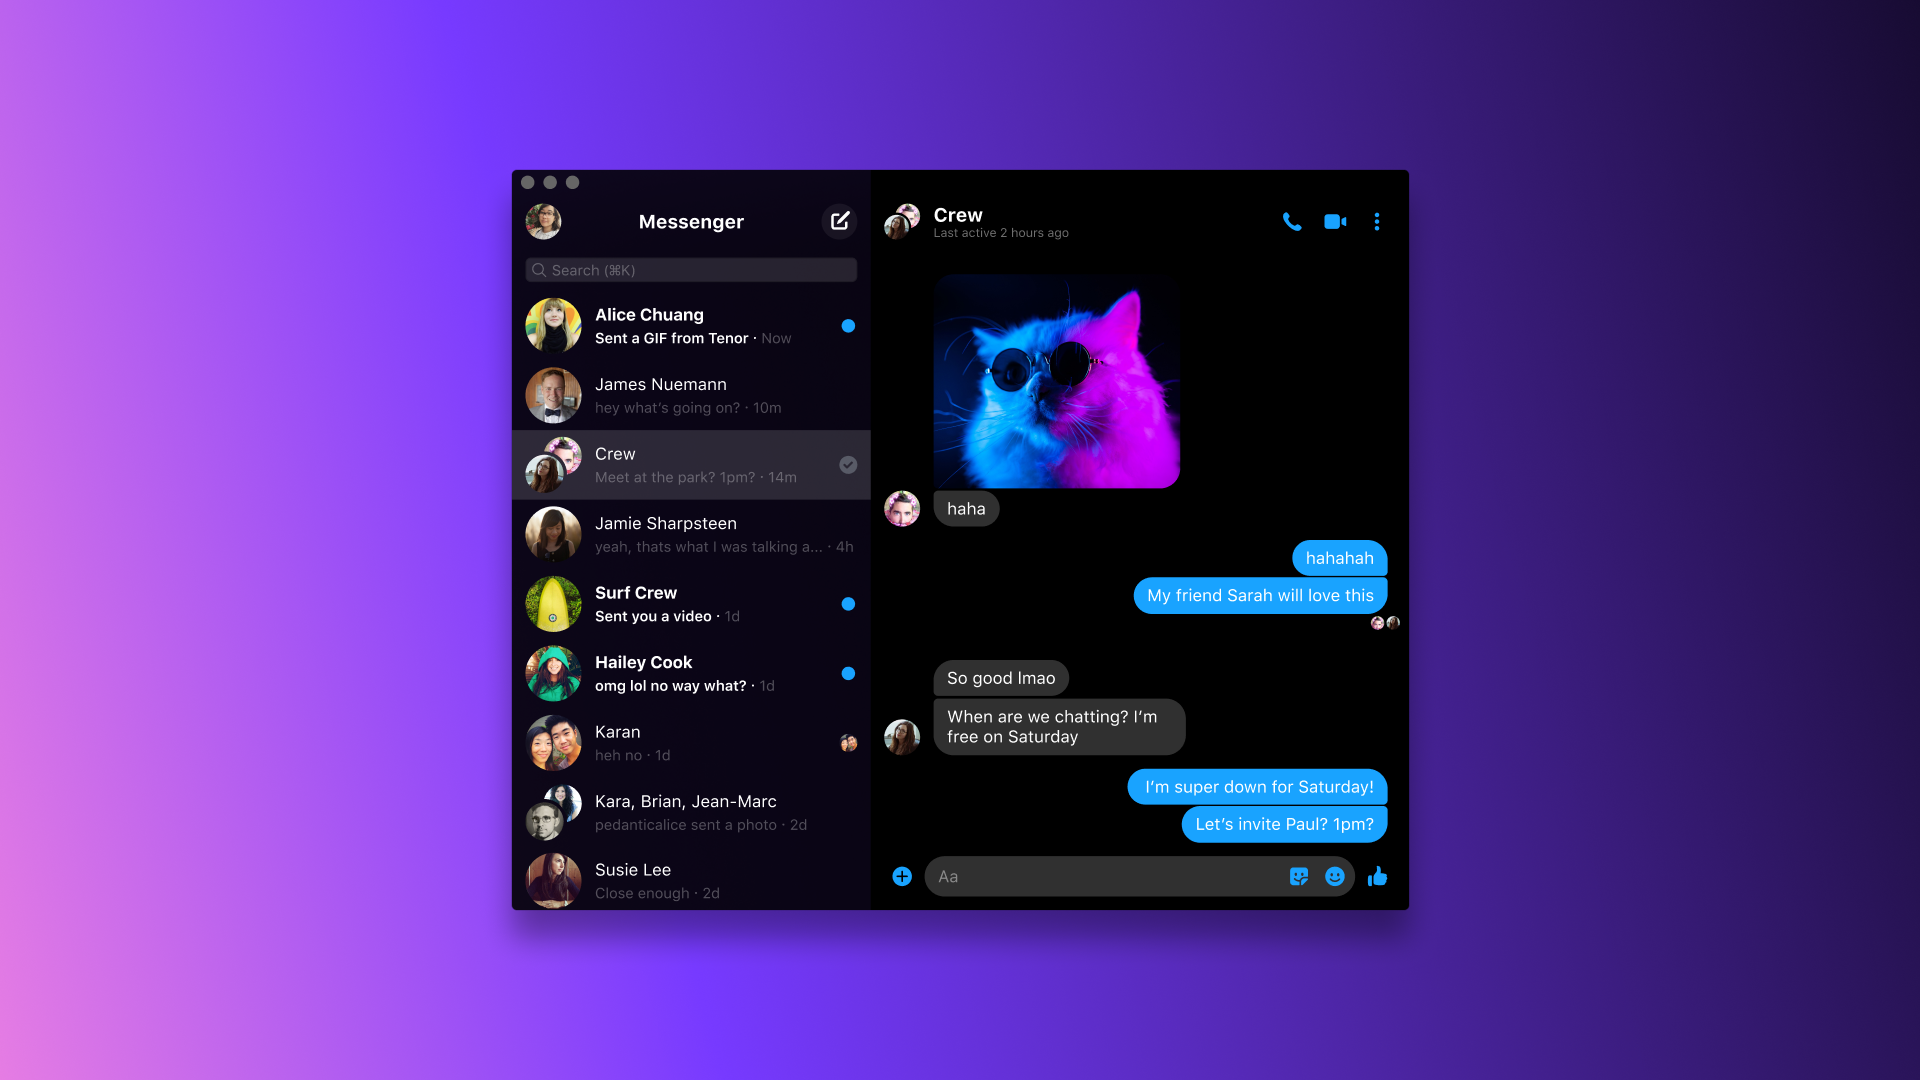 Official Facebook Messenger Desktop App Now Available on Windows 10 and macOS